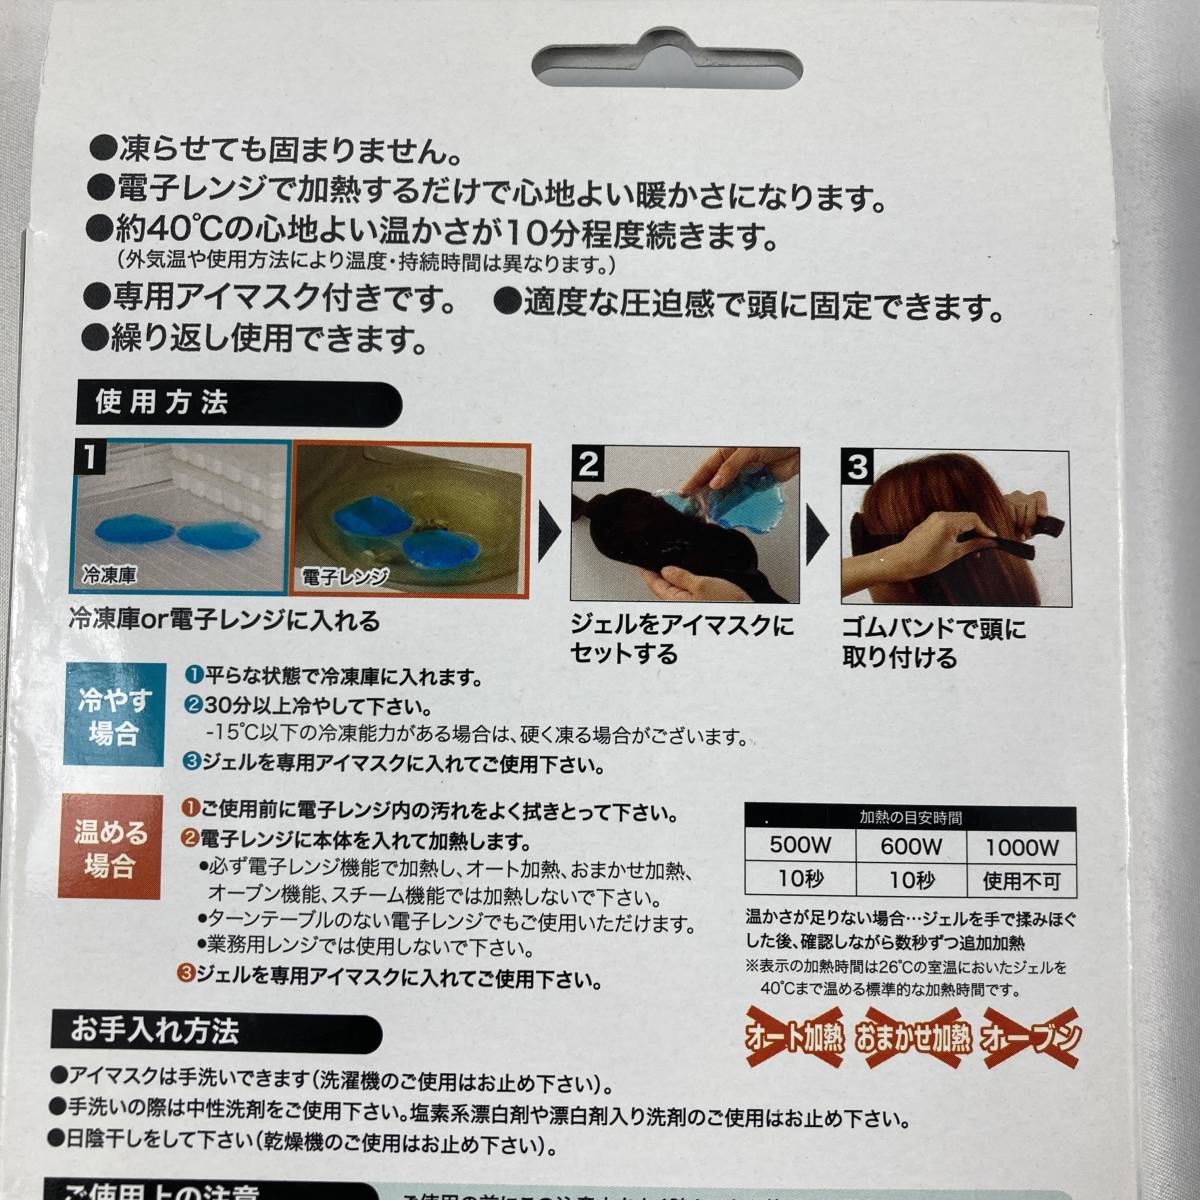 E[2003] ice / hot eye mask meo ice repetition possible to use gel 2 piece entering eye . fatigue fatigue eyes relax [460102000015]